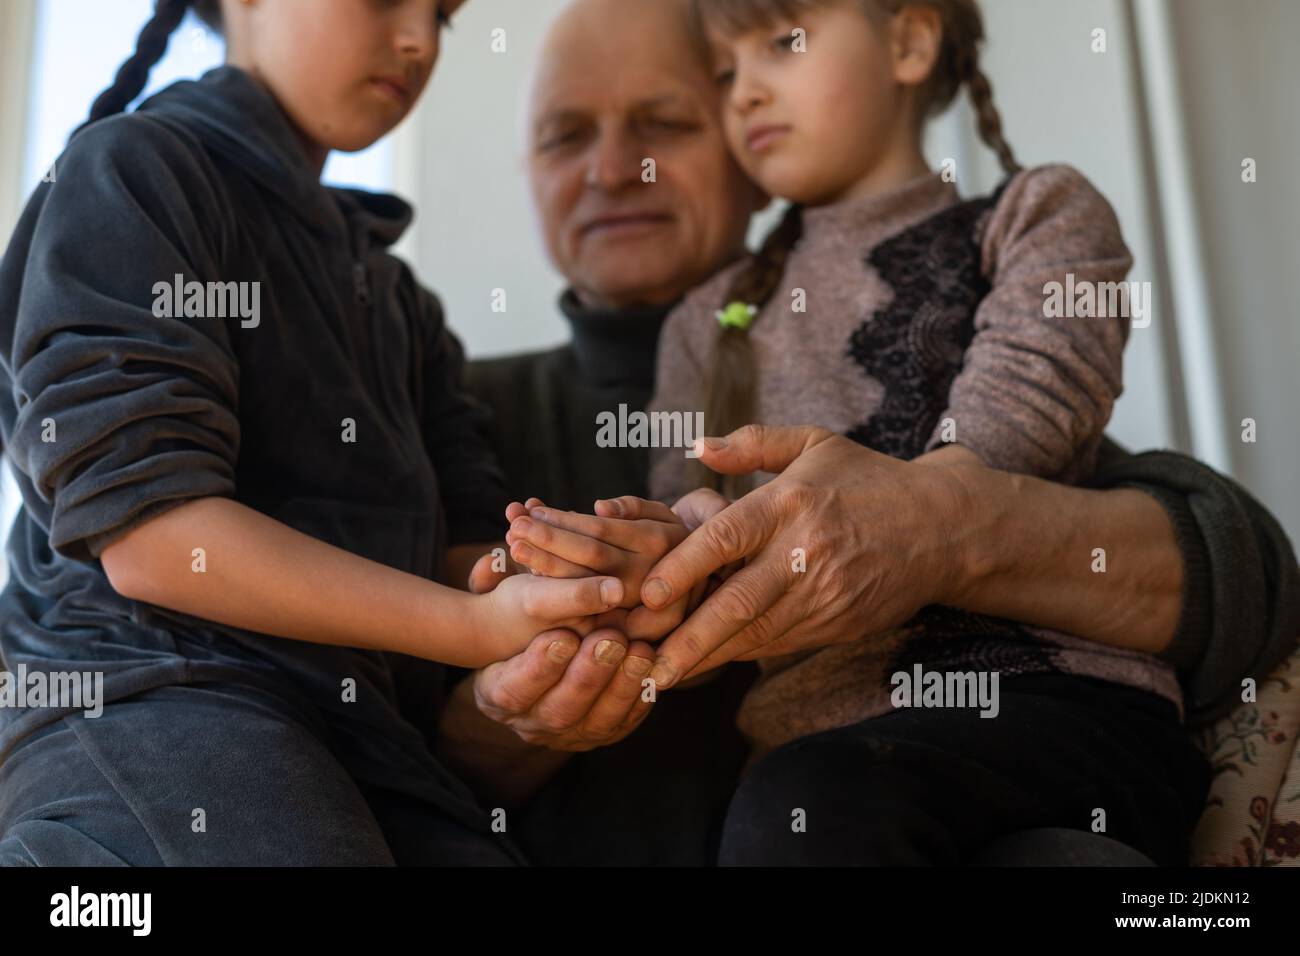 Hands of the old man and a child's hand. Stock Photo